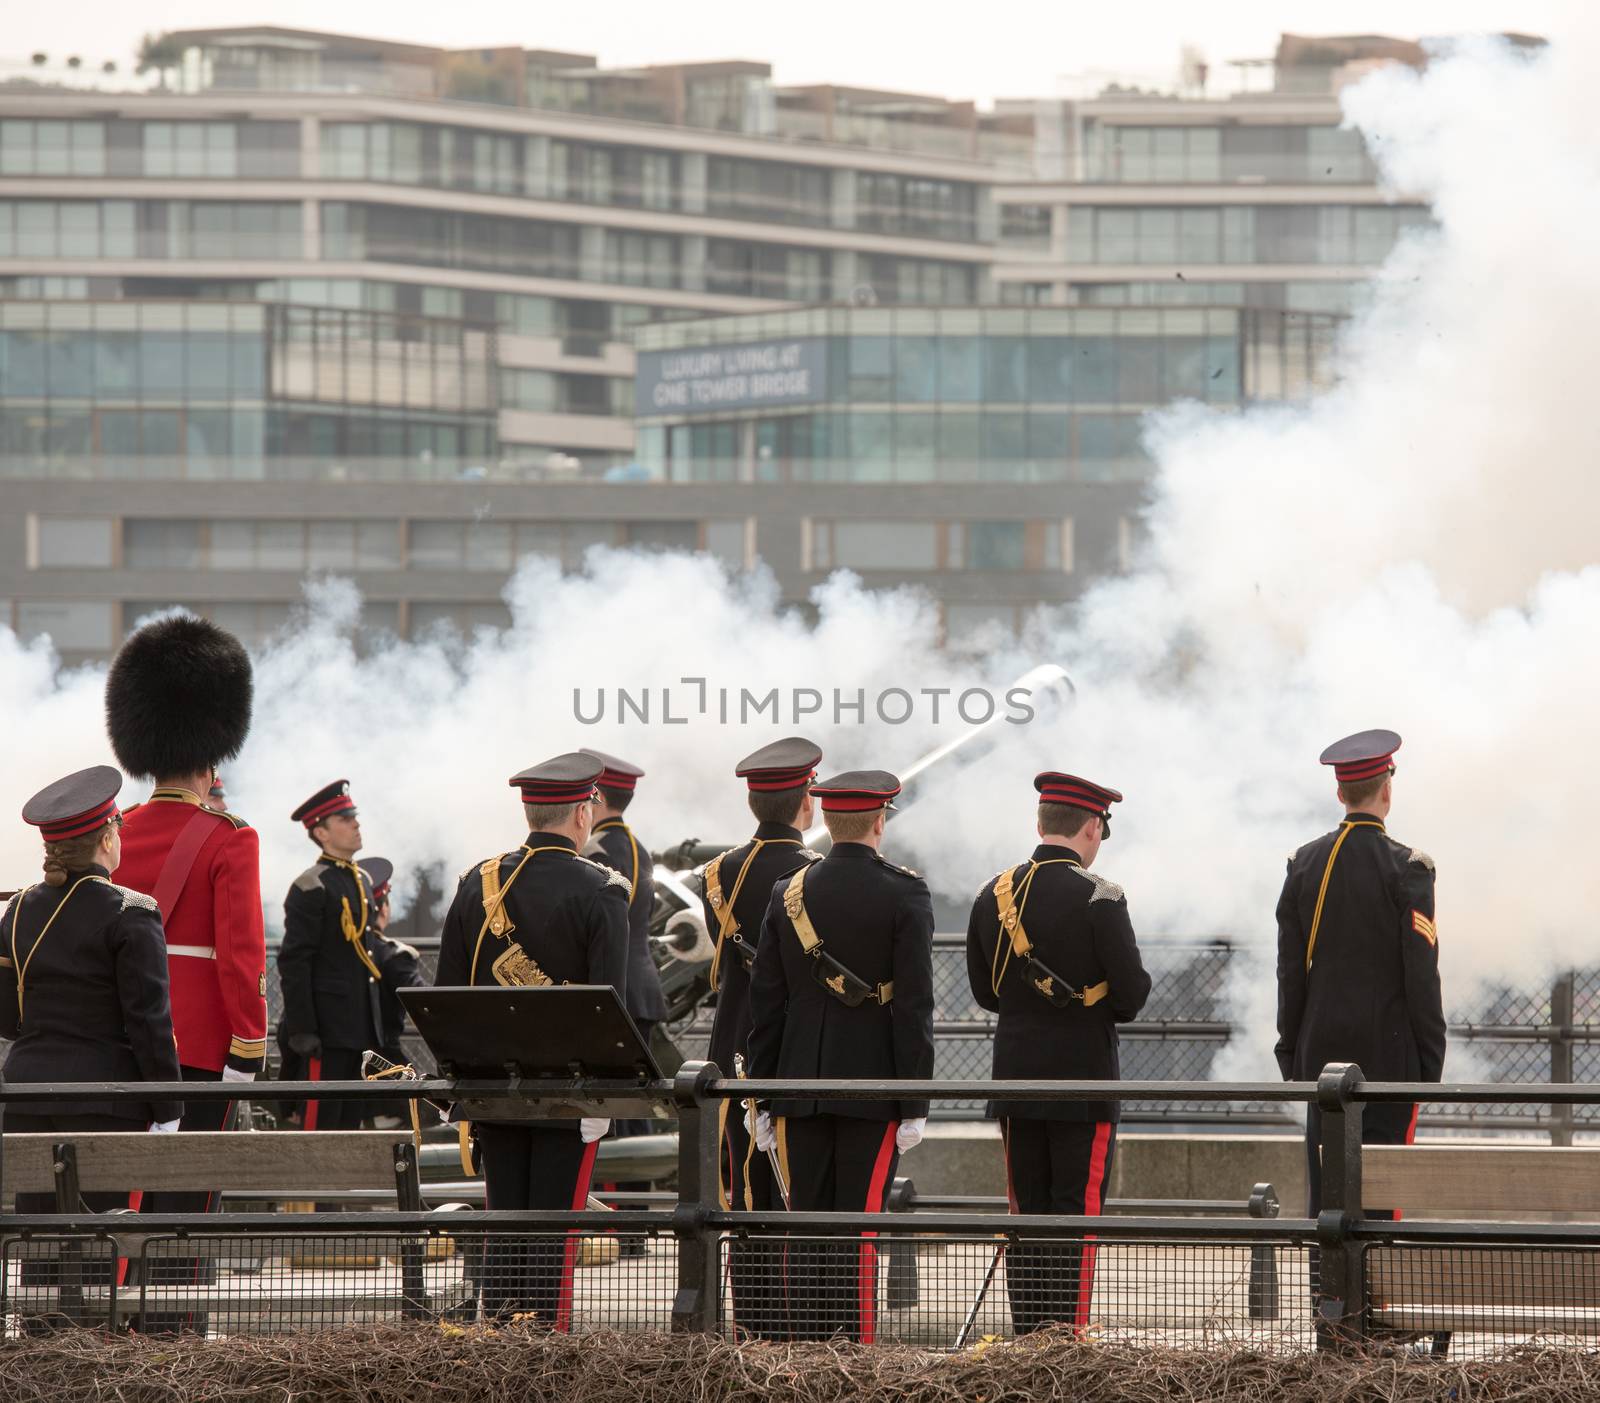 UK, London: The Honourable Artillery Company fires artillery during a 62 gun salute in London for  Queen Elizabeth II 90th birthday on April 21, 2016.Thousands of spectators lined the river for the ceremony. The Queen is the longest reigning monarch in British history. 